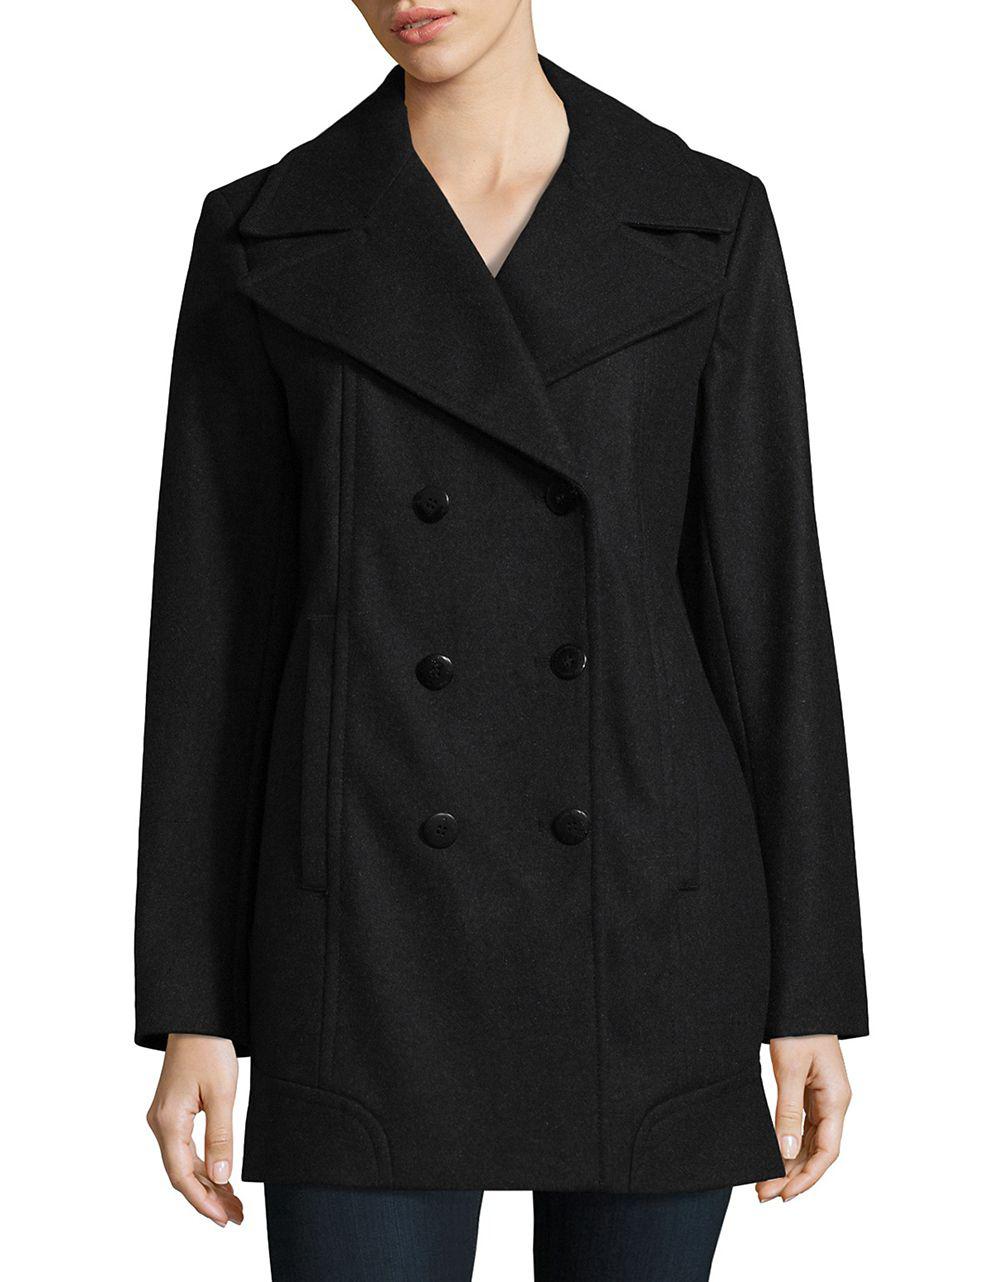 Lyst - Marc New York Double Breasted Coat in Gray